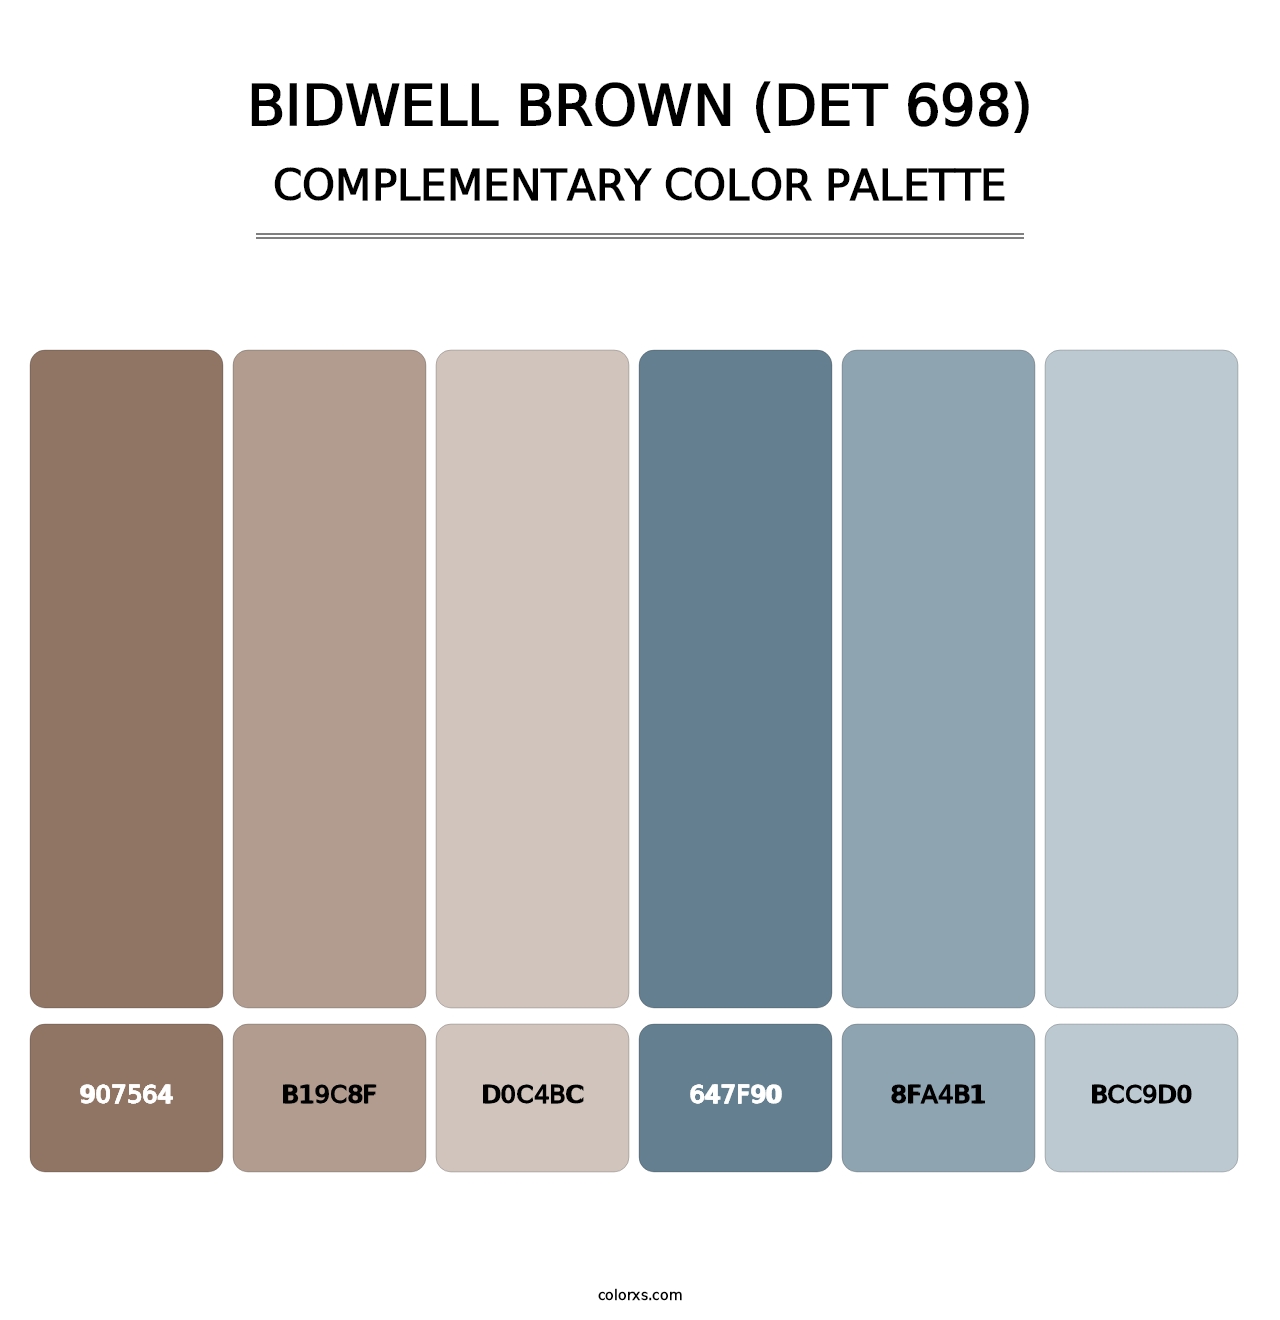 Bidwell Brown (DET 698) - Complementary Color Palette